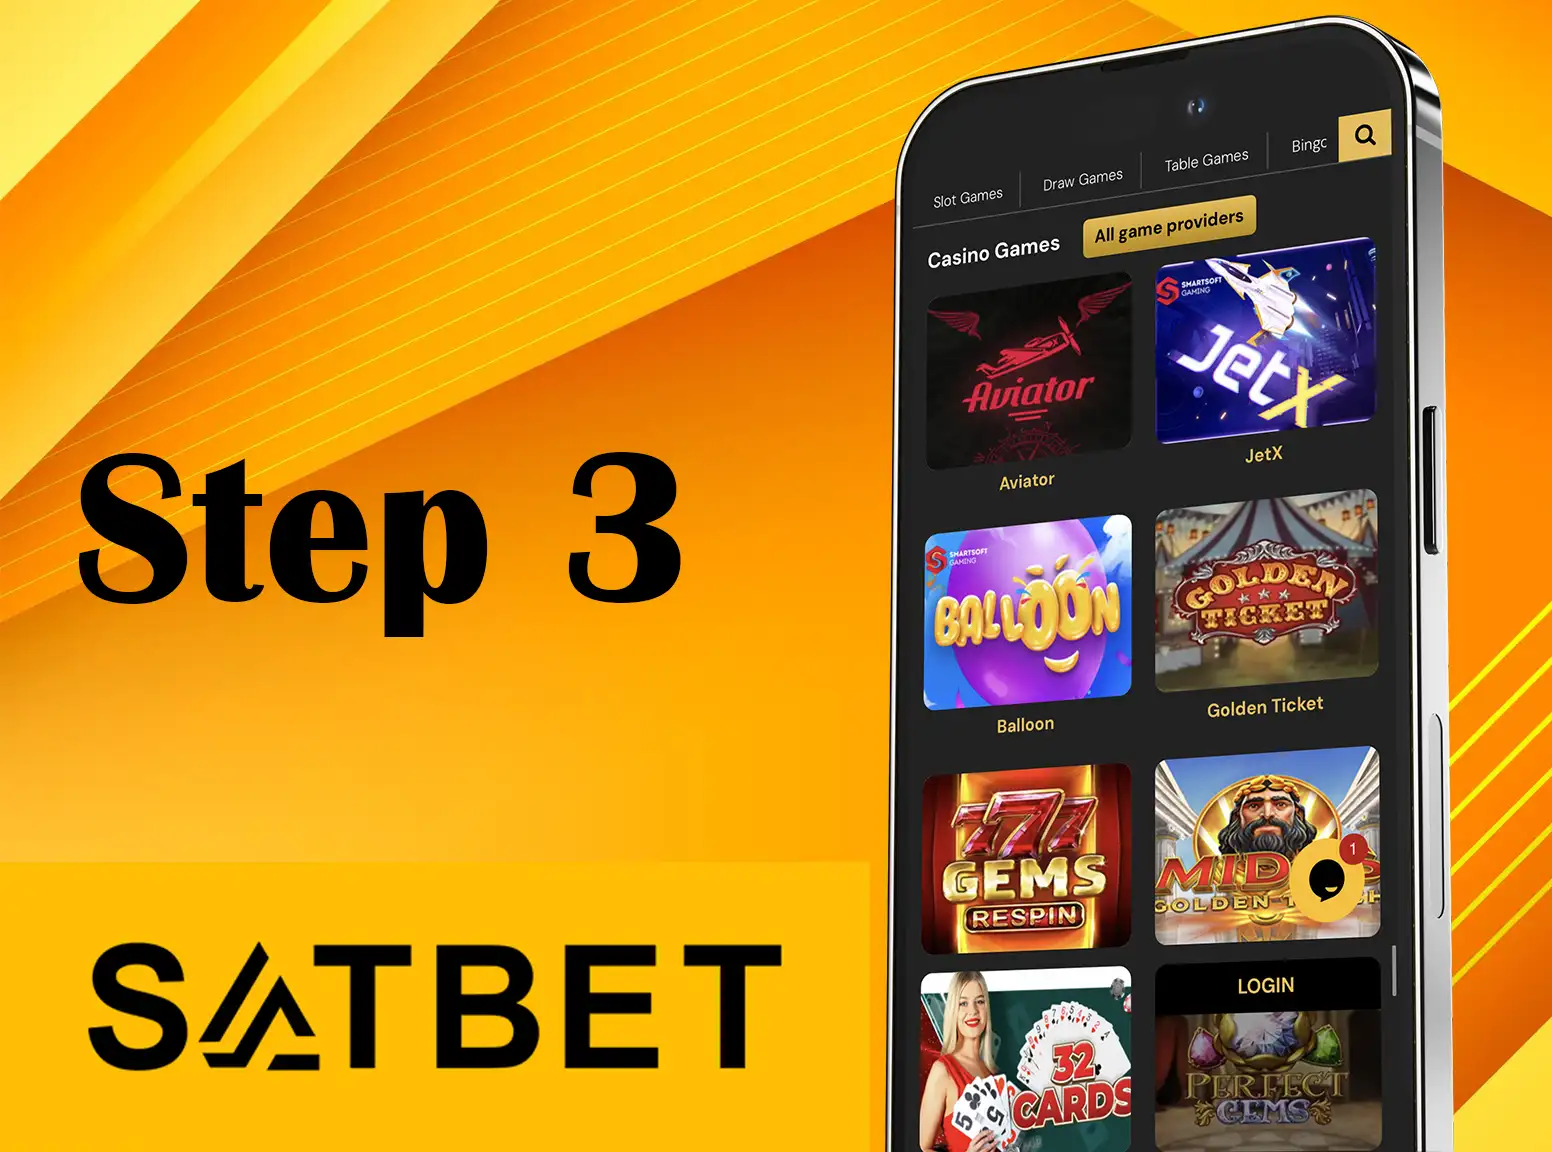 Enjoy casino games and betting and claim your bonuses with Satbet.